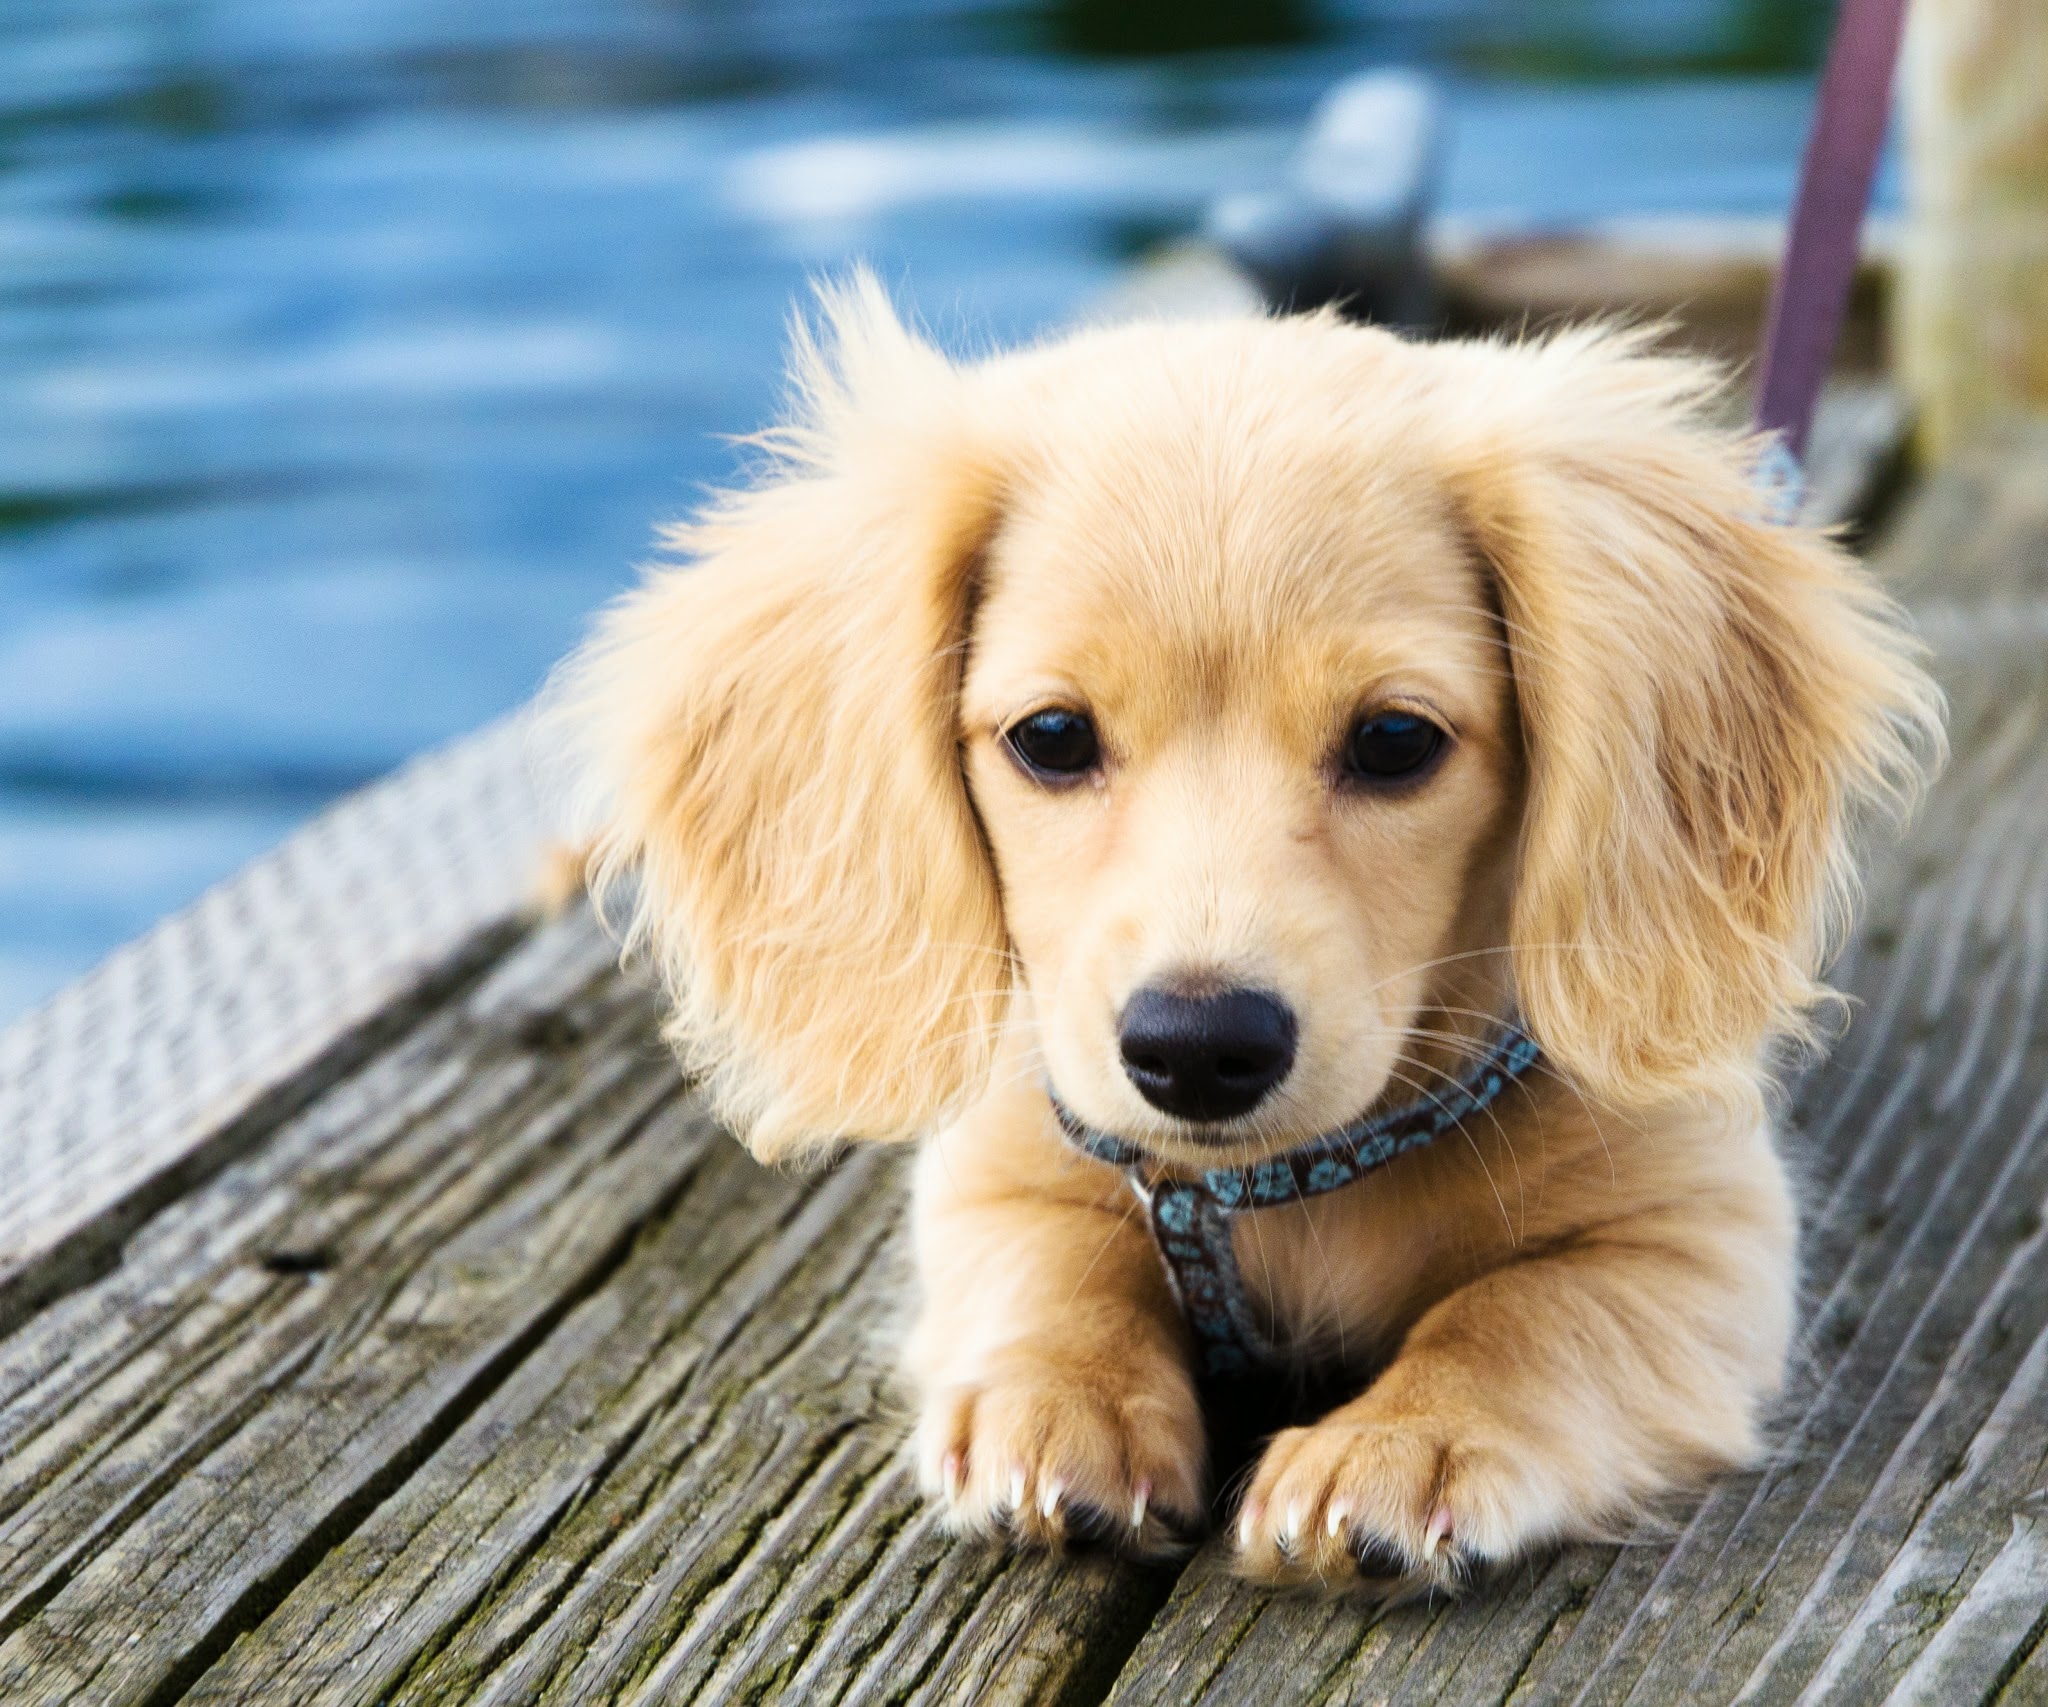 Dachshund Golden Retriever mix puppy lying on the wooden floor by the pool